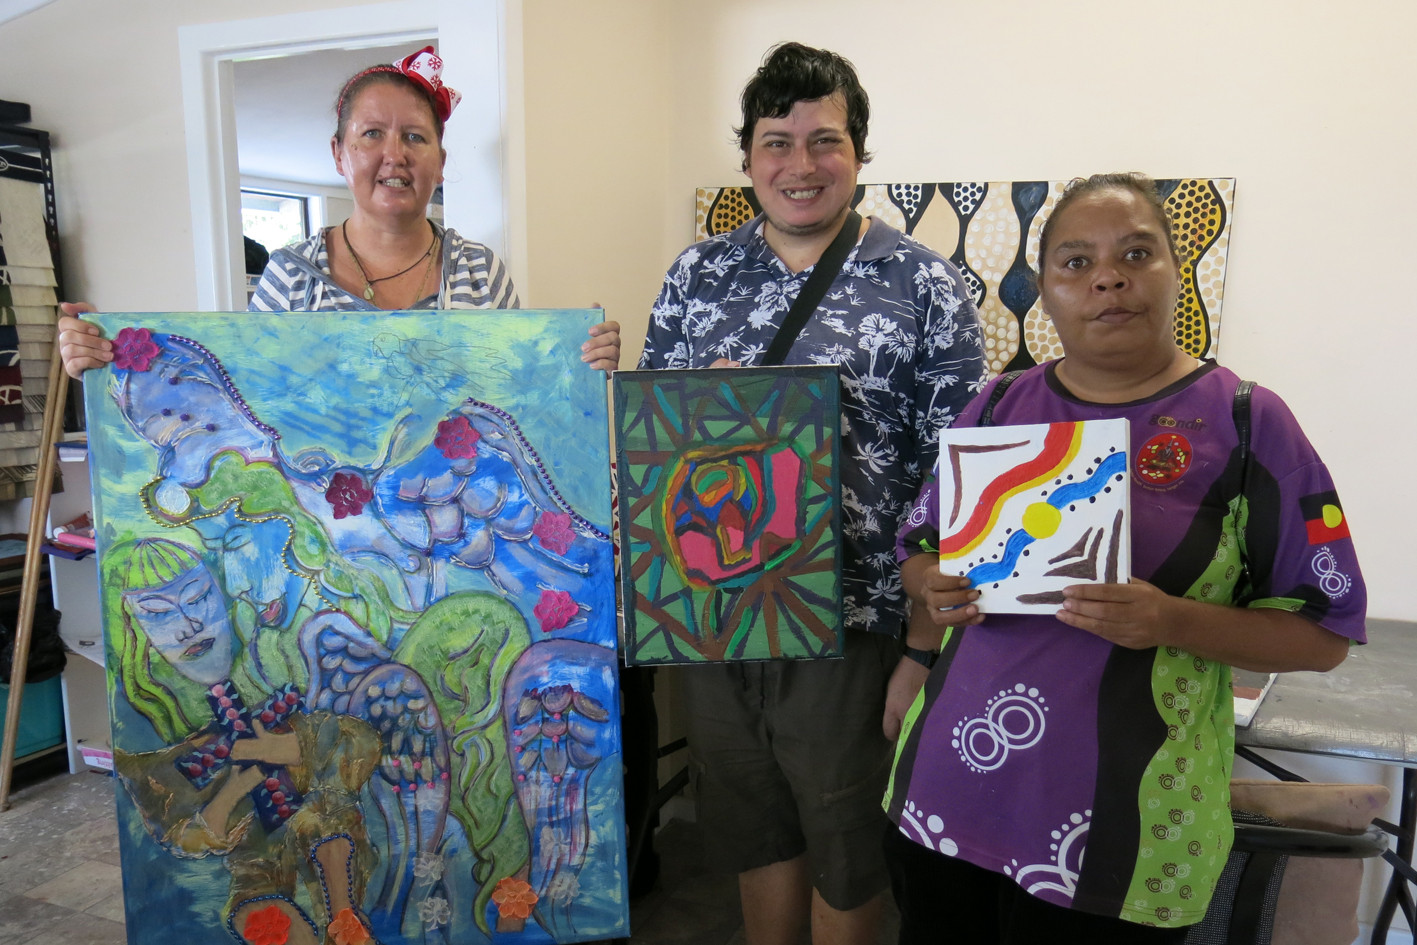 Junction Clubhouse members Sarah-Jane Deron, Matthew Scicluna and Cynthia Yeatman show off paintings they produced at the clubhouse.